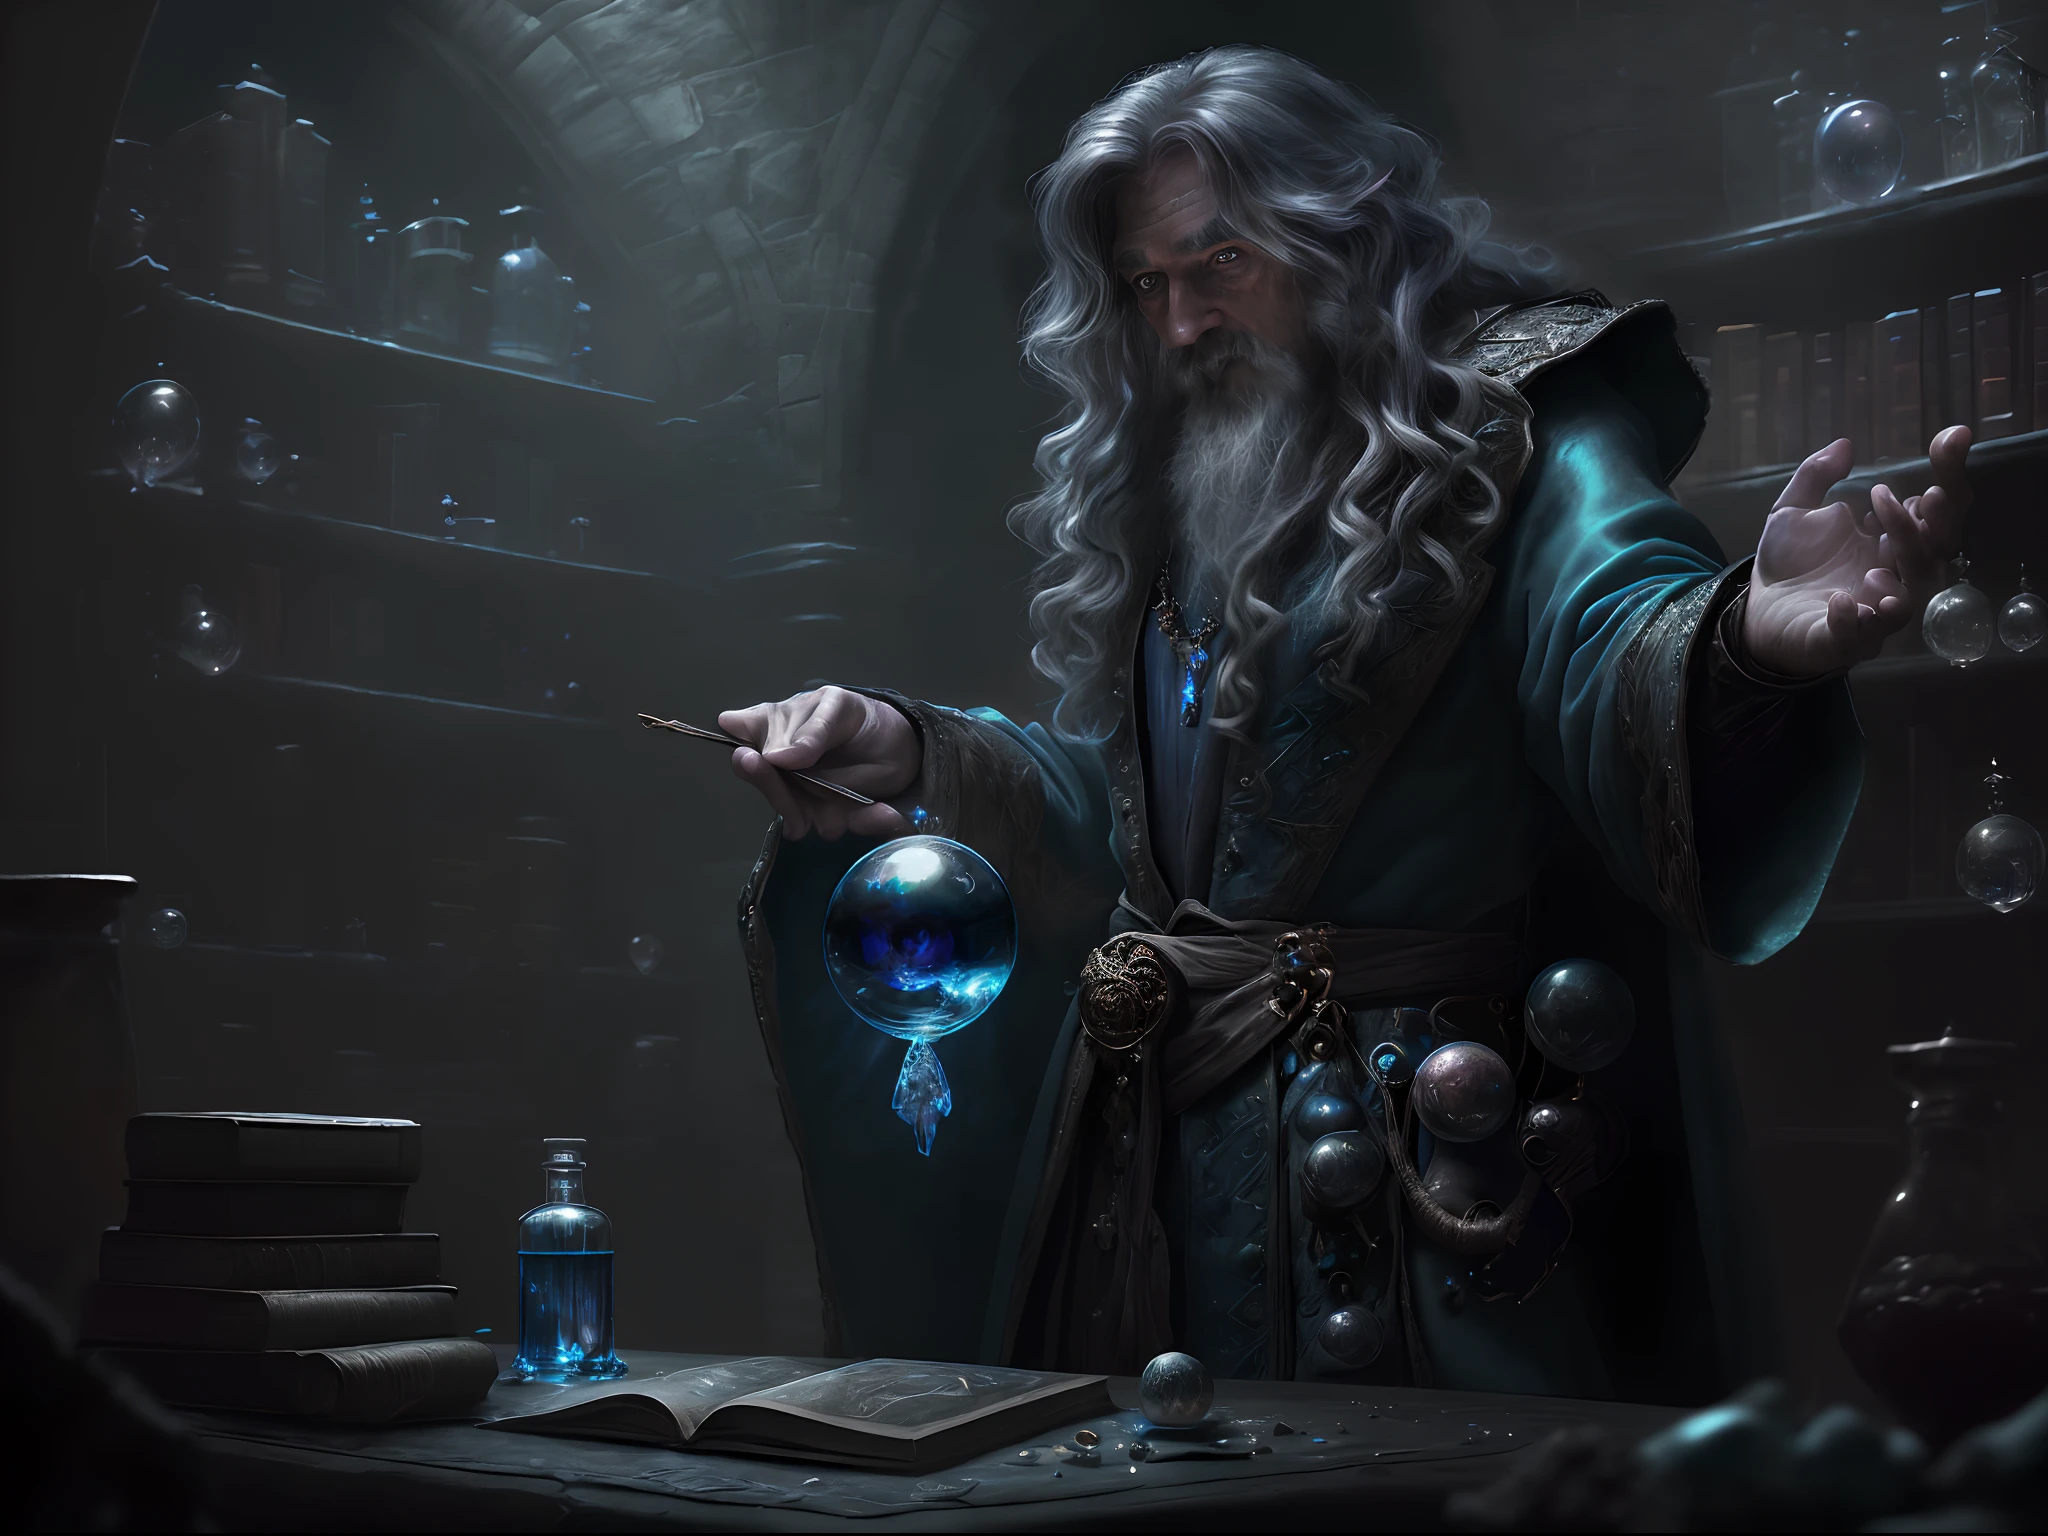 high details, best quality, 8k, [ultra detailed], masterpiece, best quality, (extremely detailed), dynamic angle, ultra wide shot, photorealistic, RAW, fantasy art, dnd art, fantasy art, realistic art, a wide angle view wallpaper of a wizard (intense details, Masterpiece, best quality: 1.5) looking into his crystal ball (intense details, Masterpiece, best quality: 1.5), casting a spell in his magical laboratory, human male wizard, fantasy wizard (intense details, Masterpiece, best quality: 1.5), D&D wizard, human male (intense details, Masterpiece, best quality: 1.5), [[anatomically correct]], dynamic hair, dynamic eyes, wearing magical robe (intense details, Masterpiece, best quality: 1.5), dynamic colors, ultra detailed face (intense details, Masterpiece, best quality: 1.5), manipulating blue magical energy, in his laboratory (intense details, Masterpiece, best quality: 1.5), many magical tomes, magical library (intense details, Masterpiece, best quality: 1.5),  many magical vials, ultra wide angle from a medium distance,